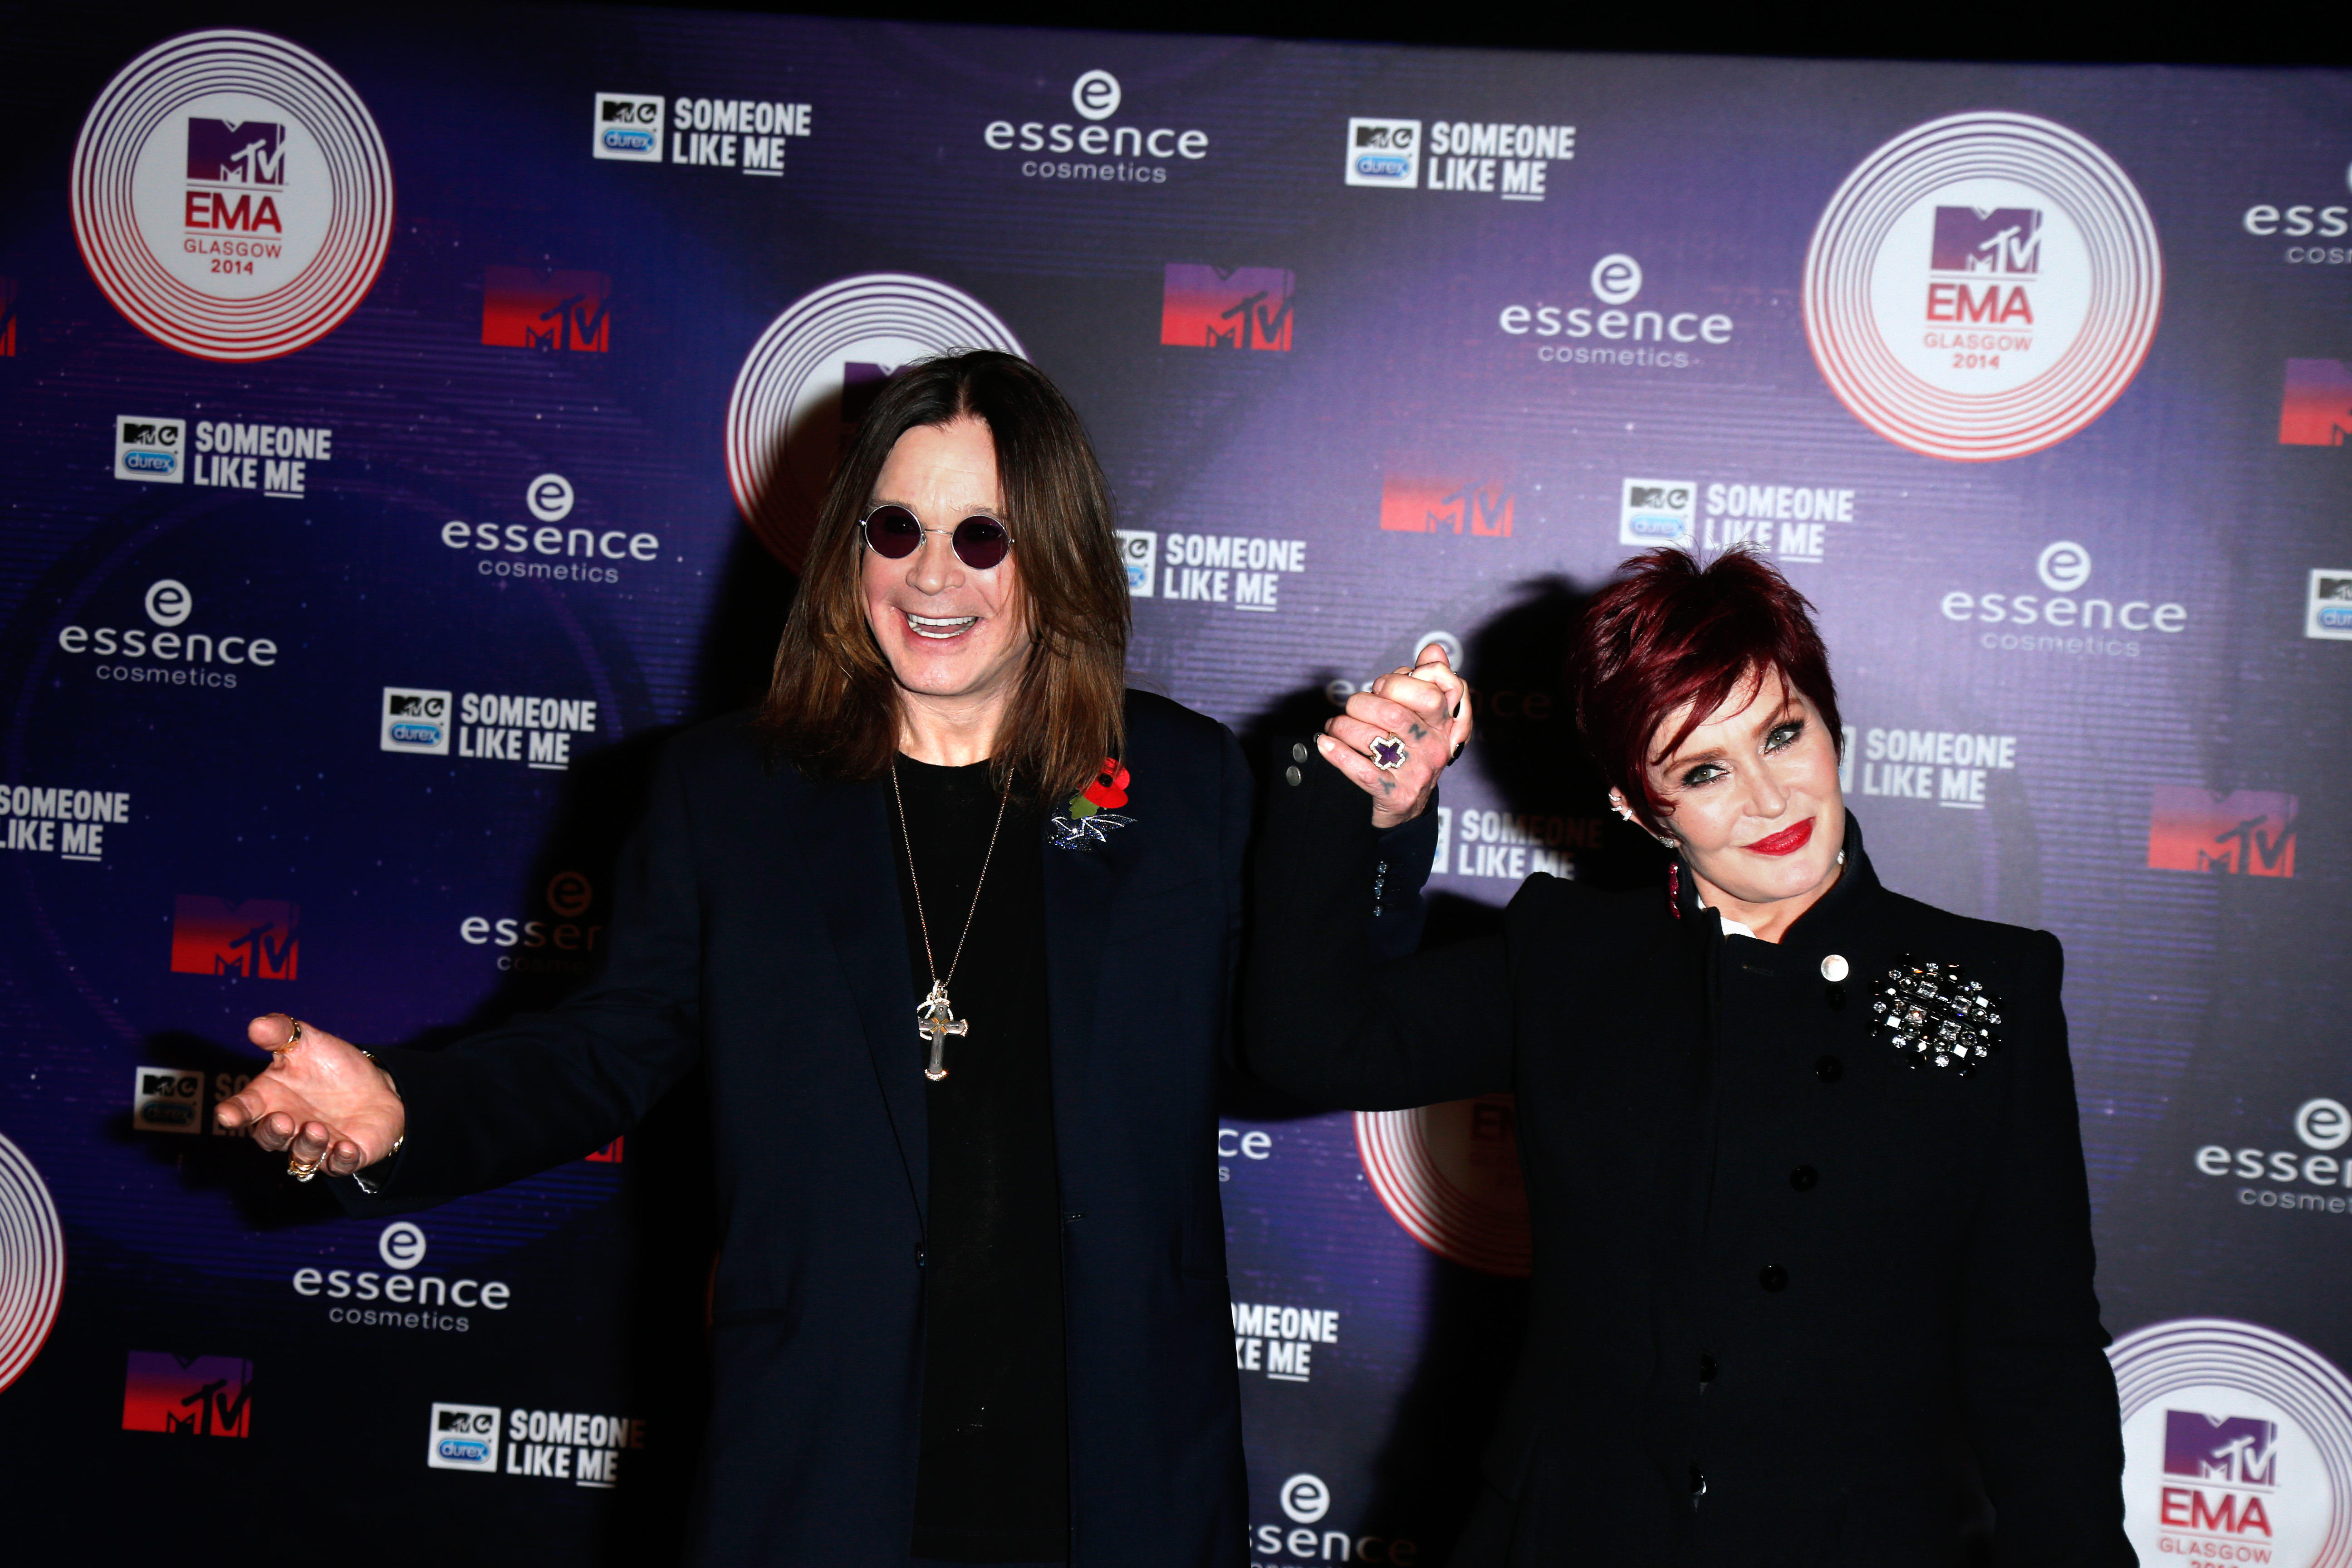 Ozzy and Sharon Osbourne with their hands held up together